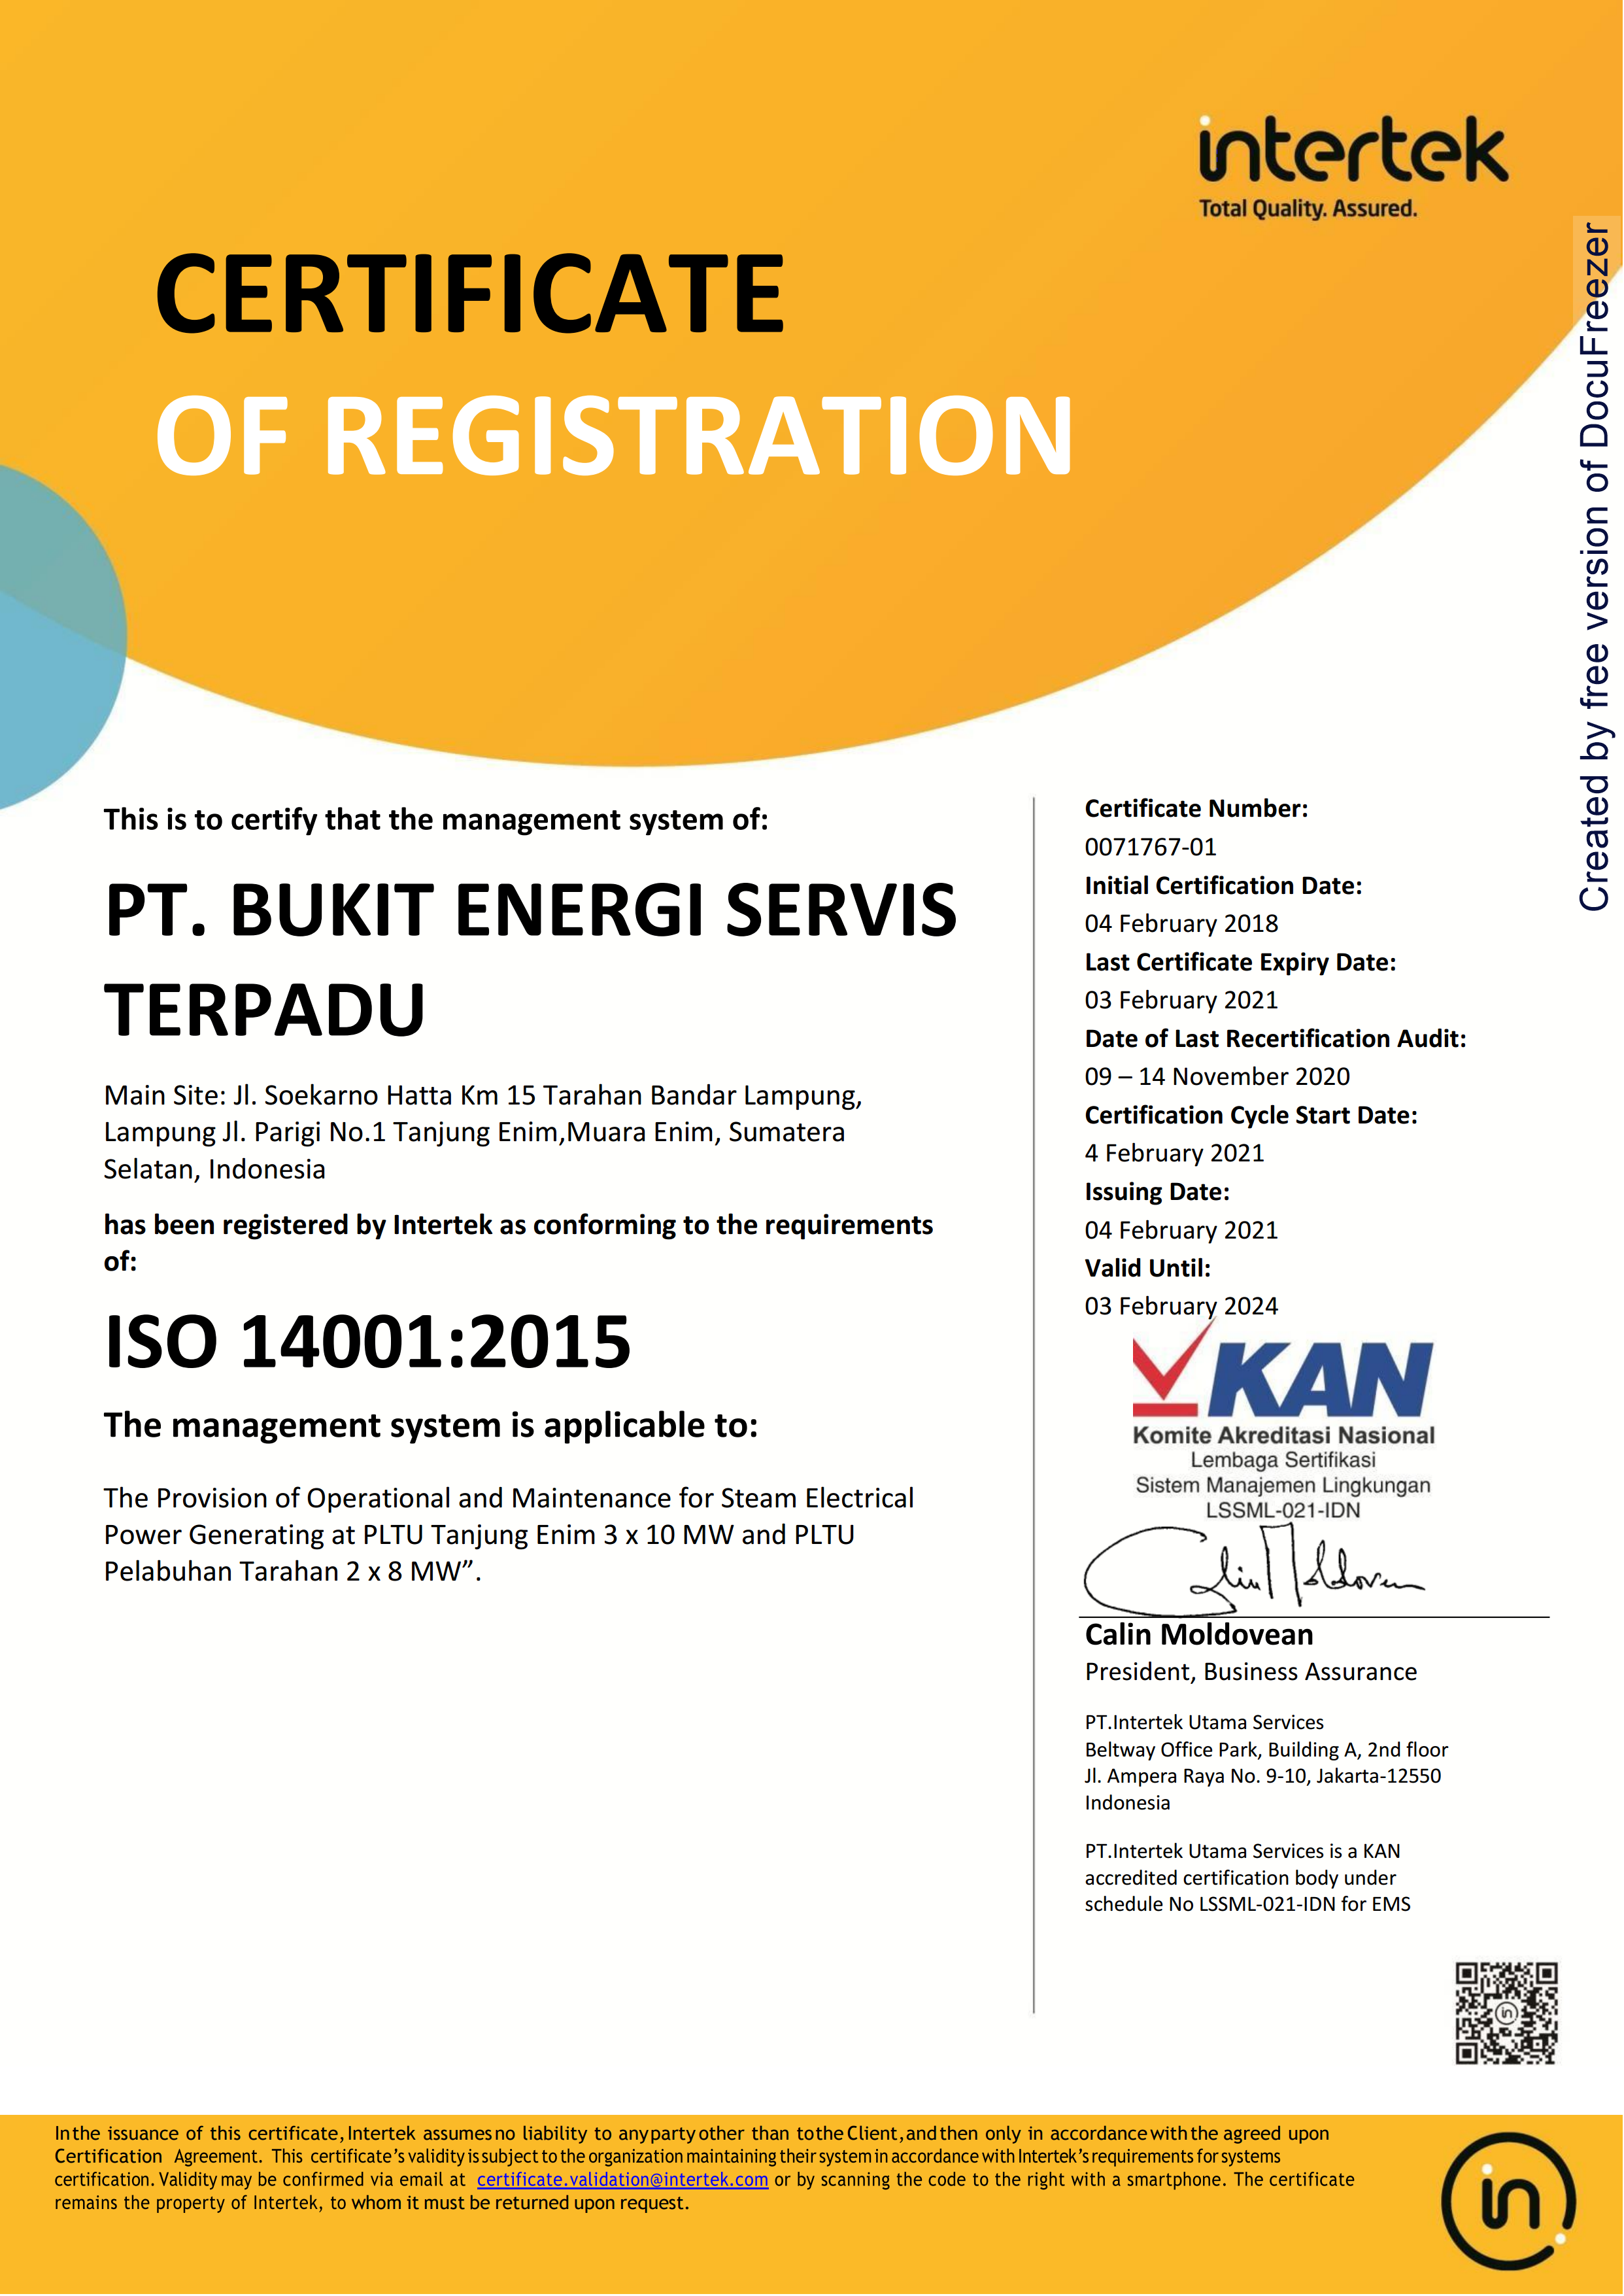 ISO 14001 Certificate;2015